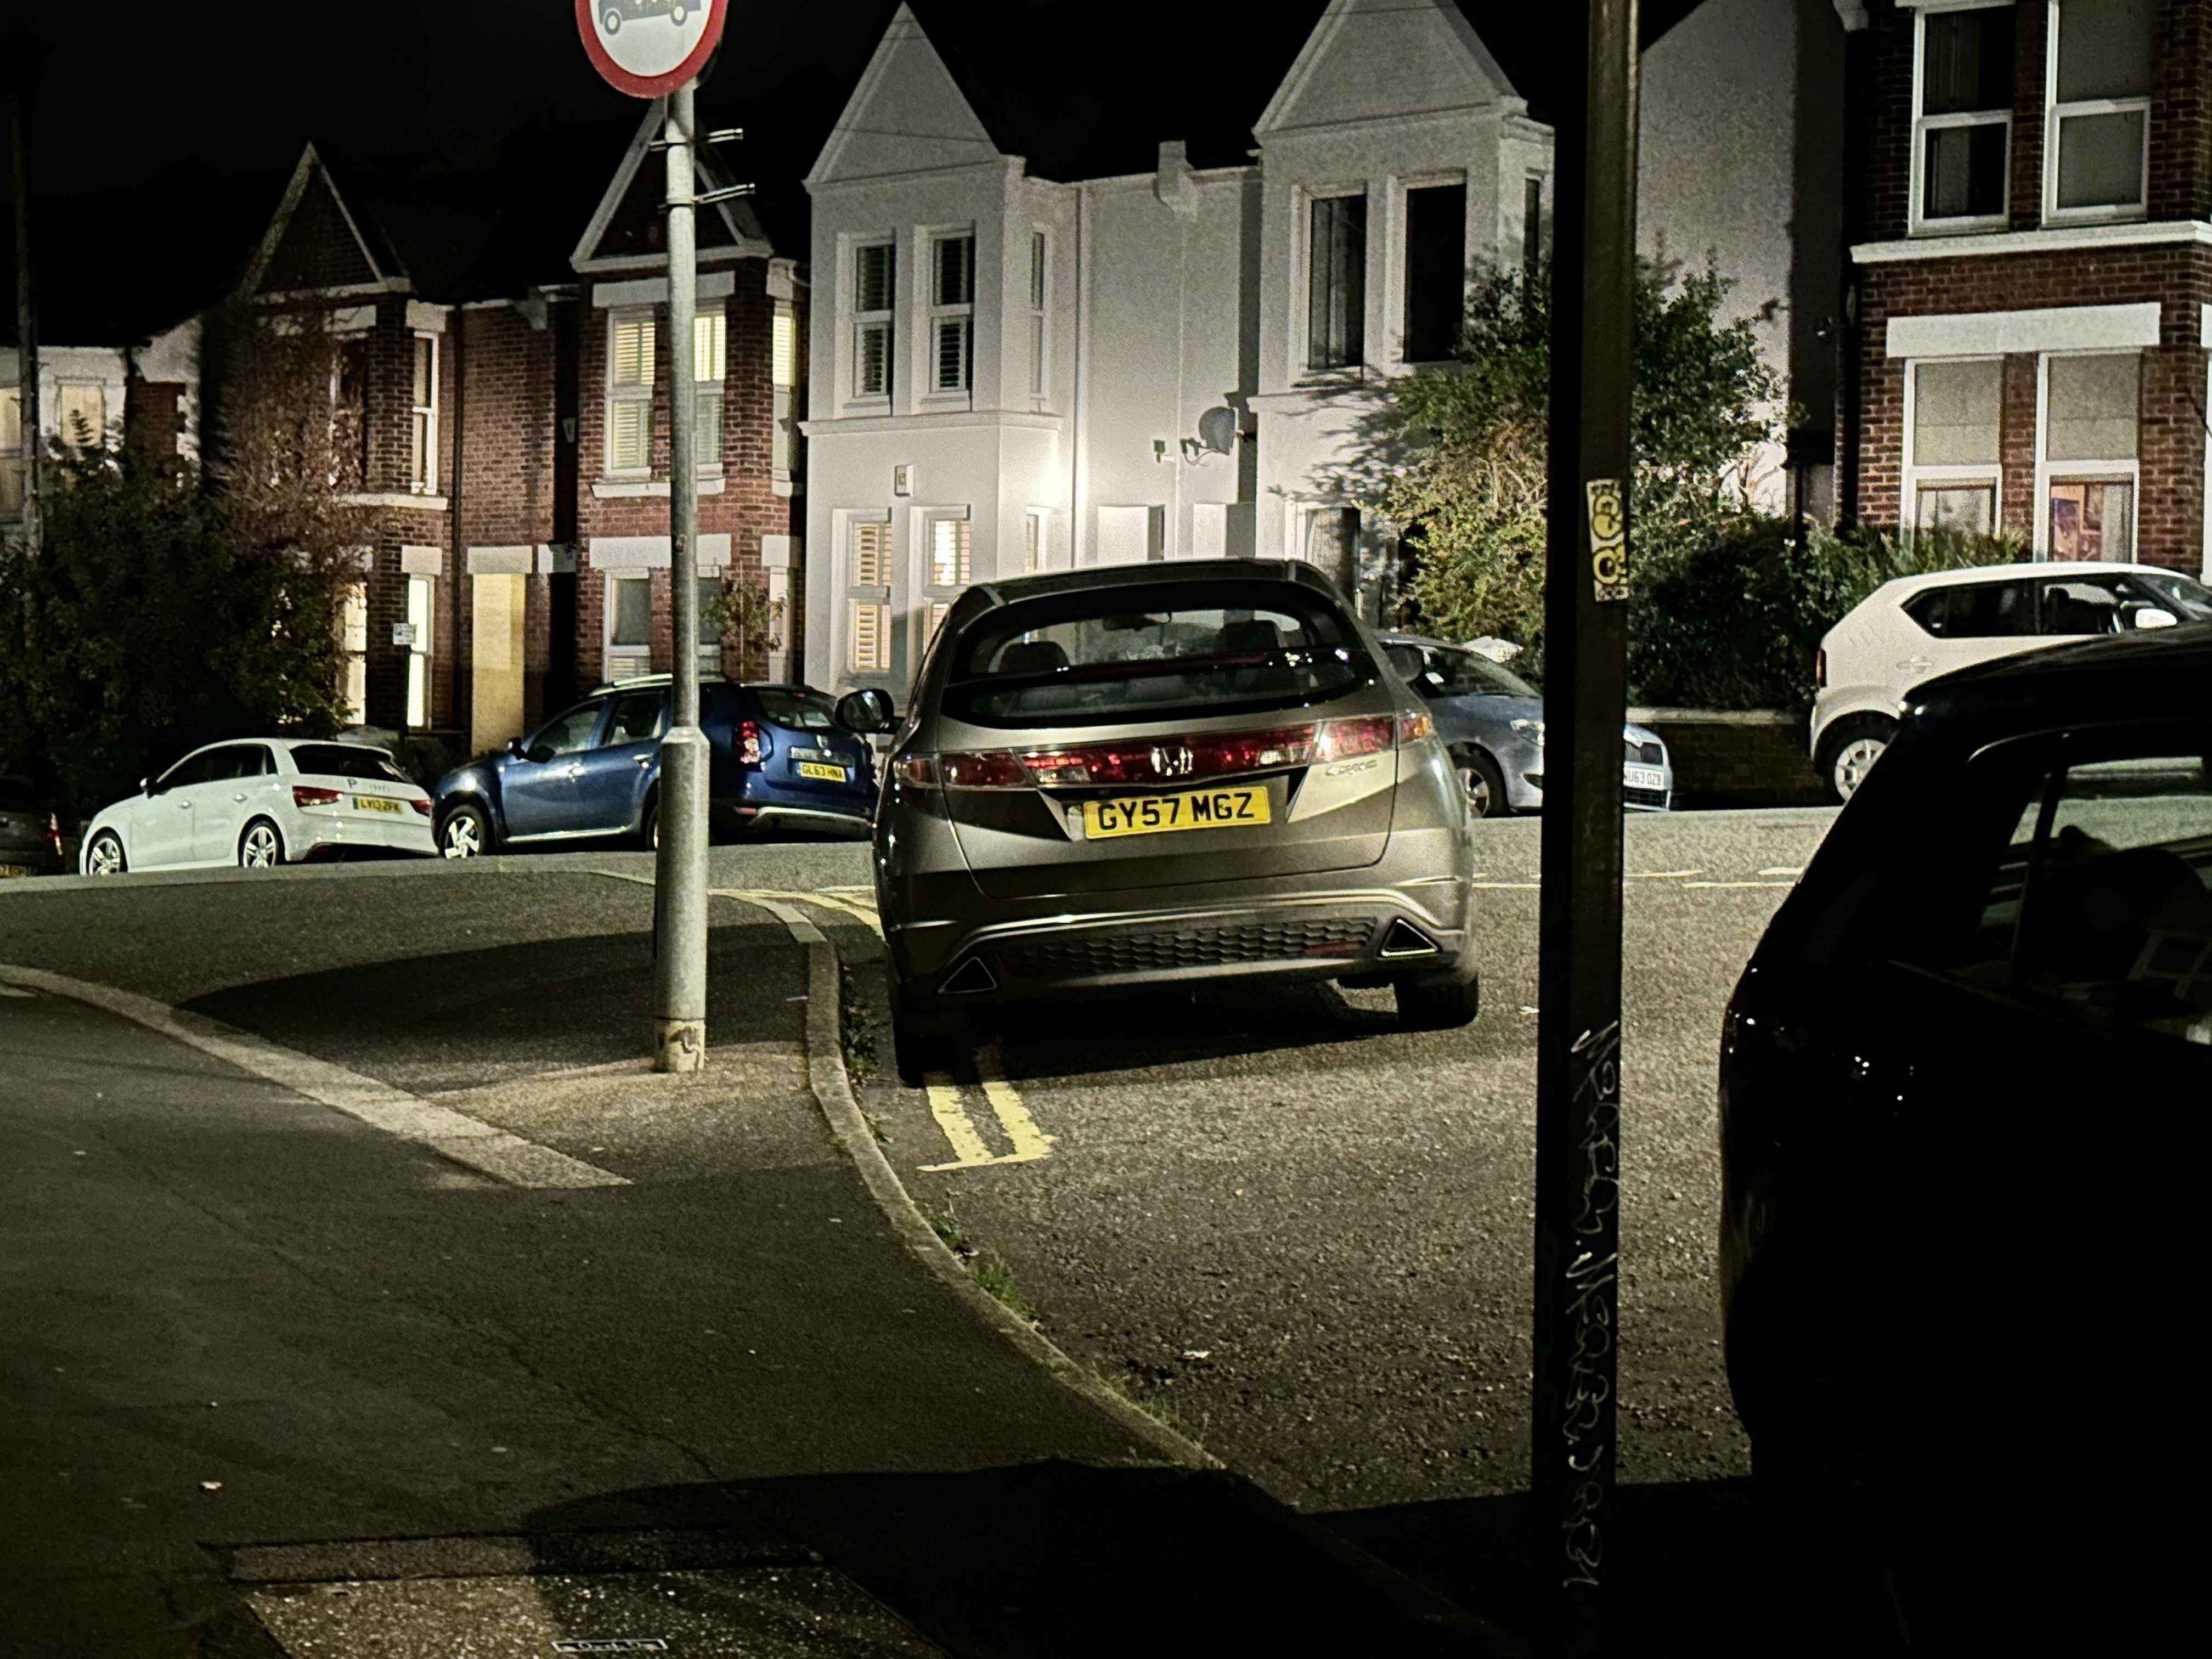 Photograph of GY57 MGZ - a Gold Honda Civic parked in Hollingdean by a non-resident. The second of three photographs supplied by the residents of Hollingdean.